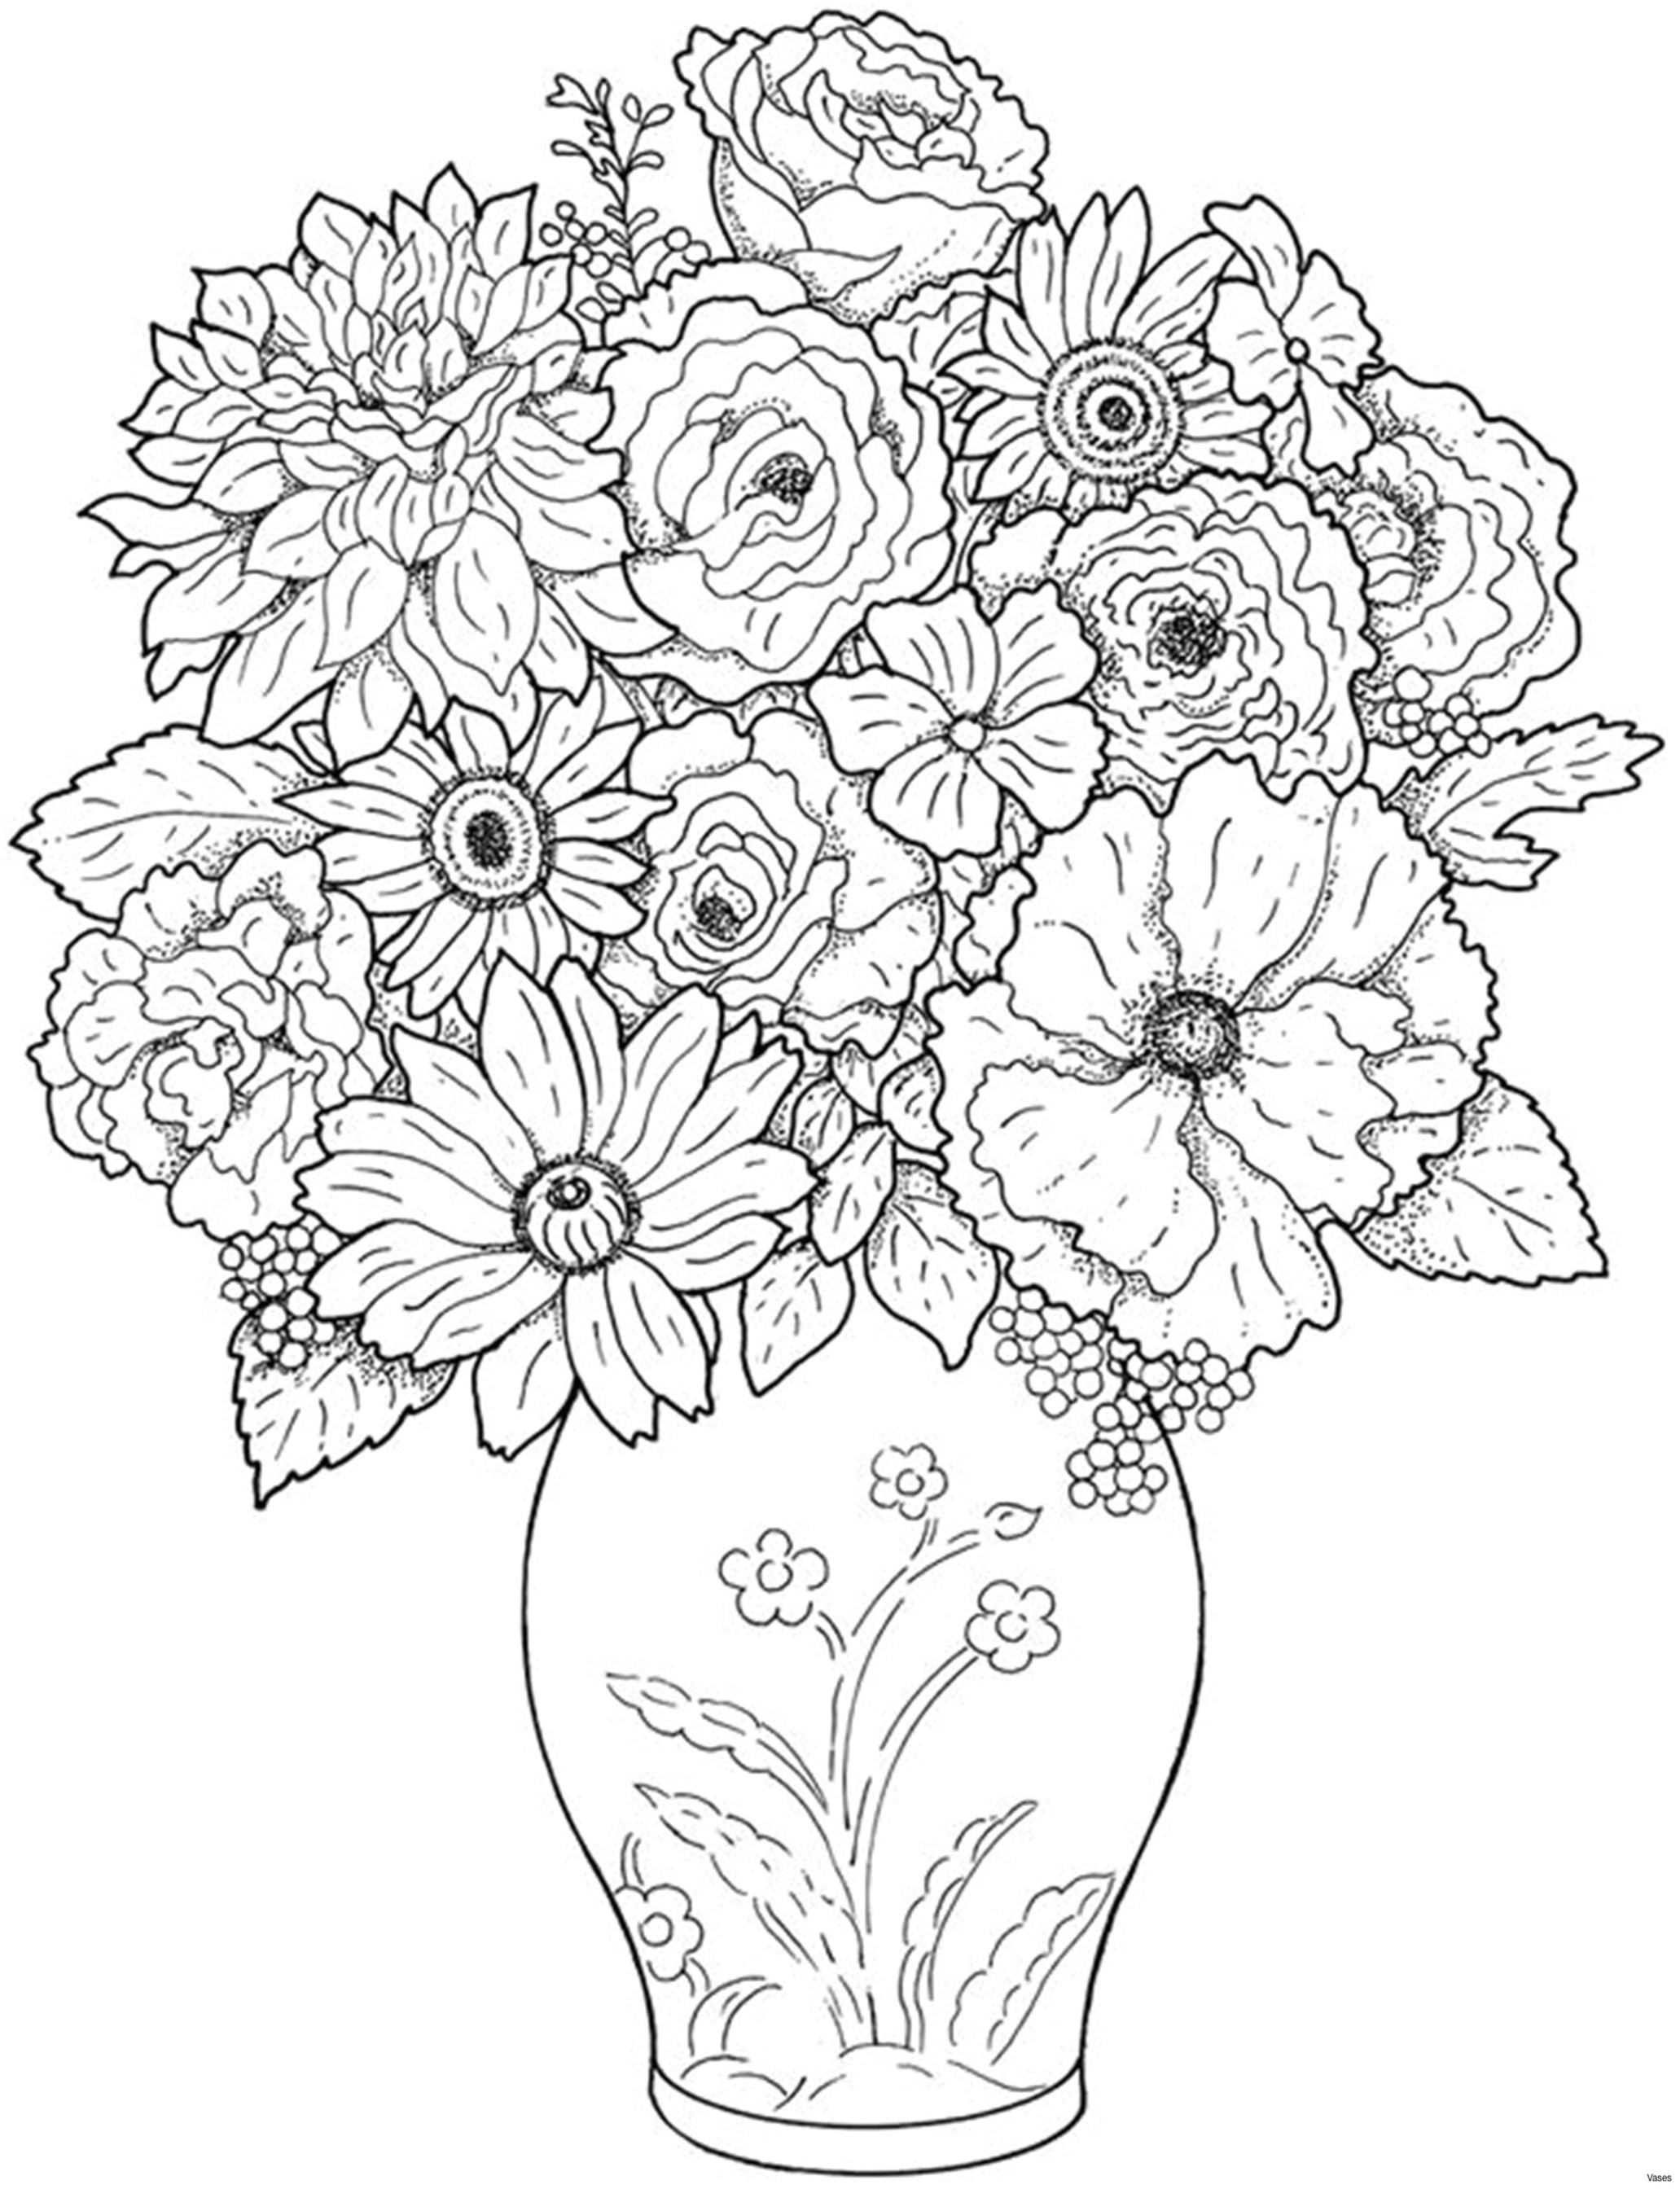 Drawings Of Flowers In Color Fresh Flowers to Color Creditoparataxi Com